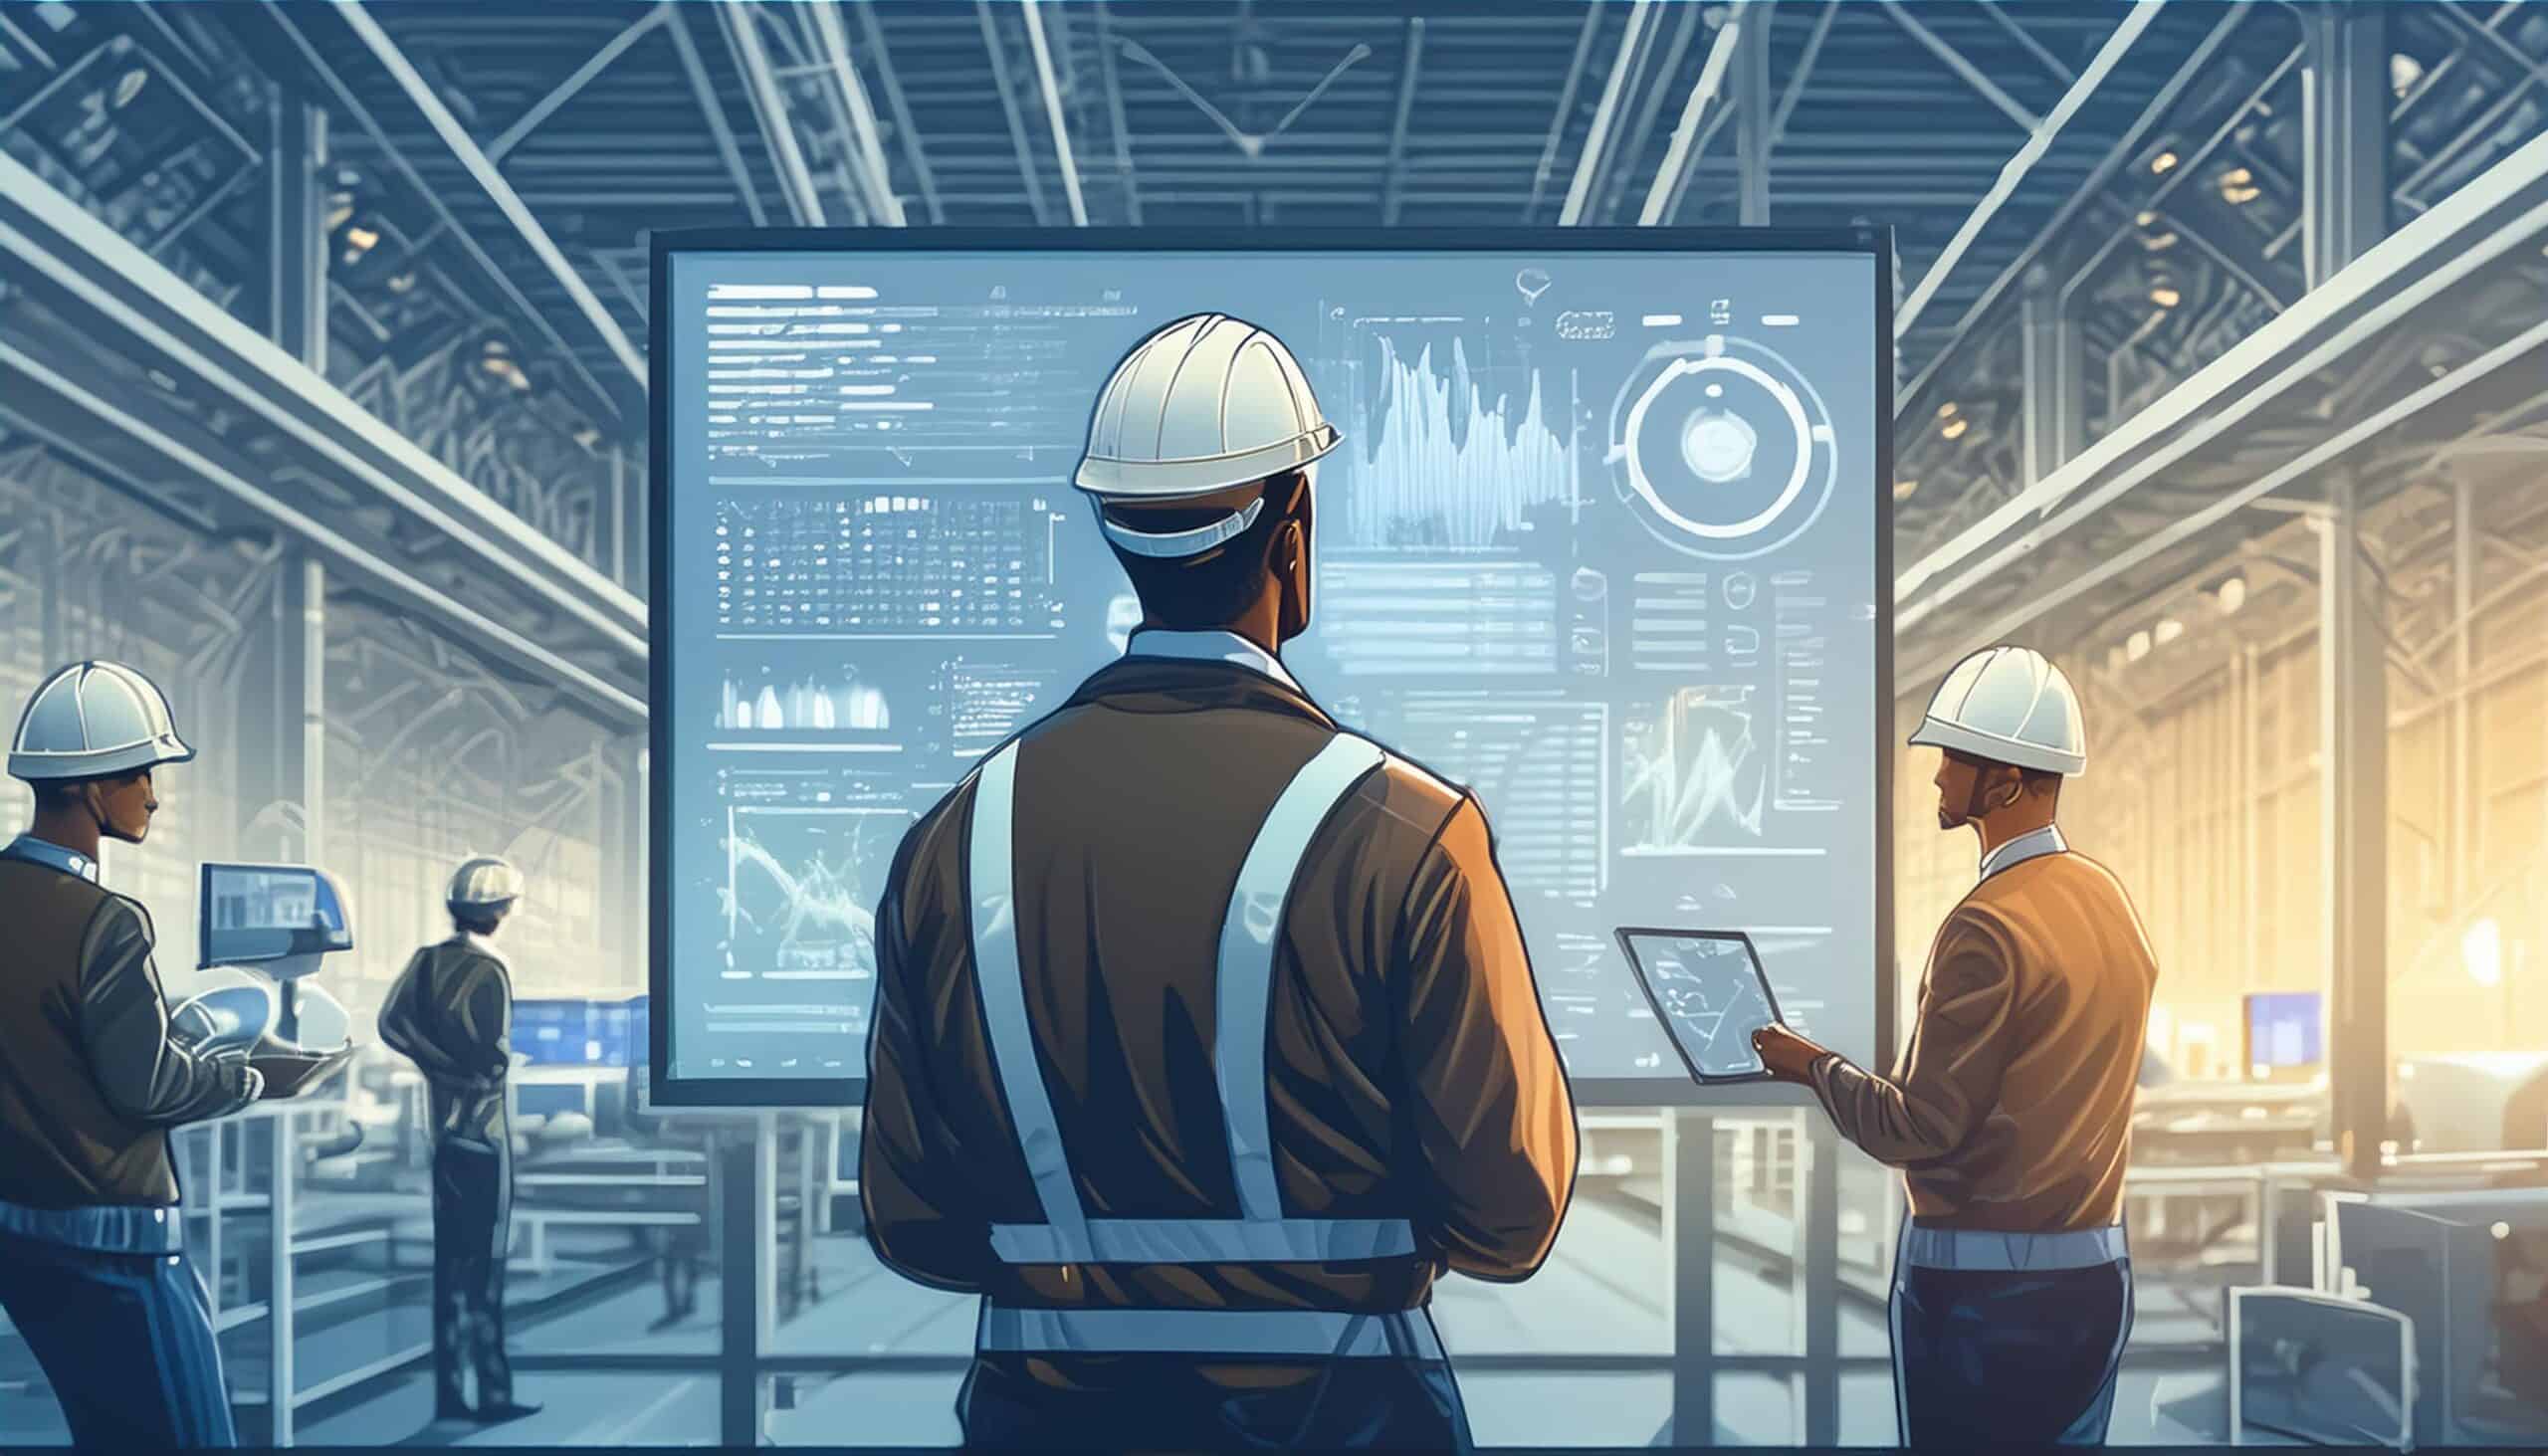 An illustration of a manufacturing facility with workers actively engaged in monitoring and measuring production output. Highlight a central figure analyzing data on a digital dashboard, with charts and graphs displaying key performance indicators (KPIs) like Overall Equipment Effectiveness (OEE). The background can include advanced machinery and a well-organized production line, emphasizing efficiency and productivity.